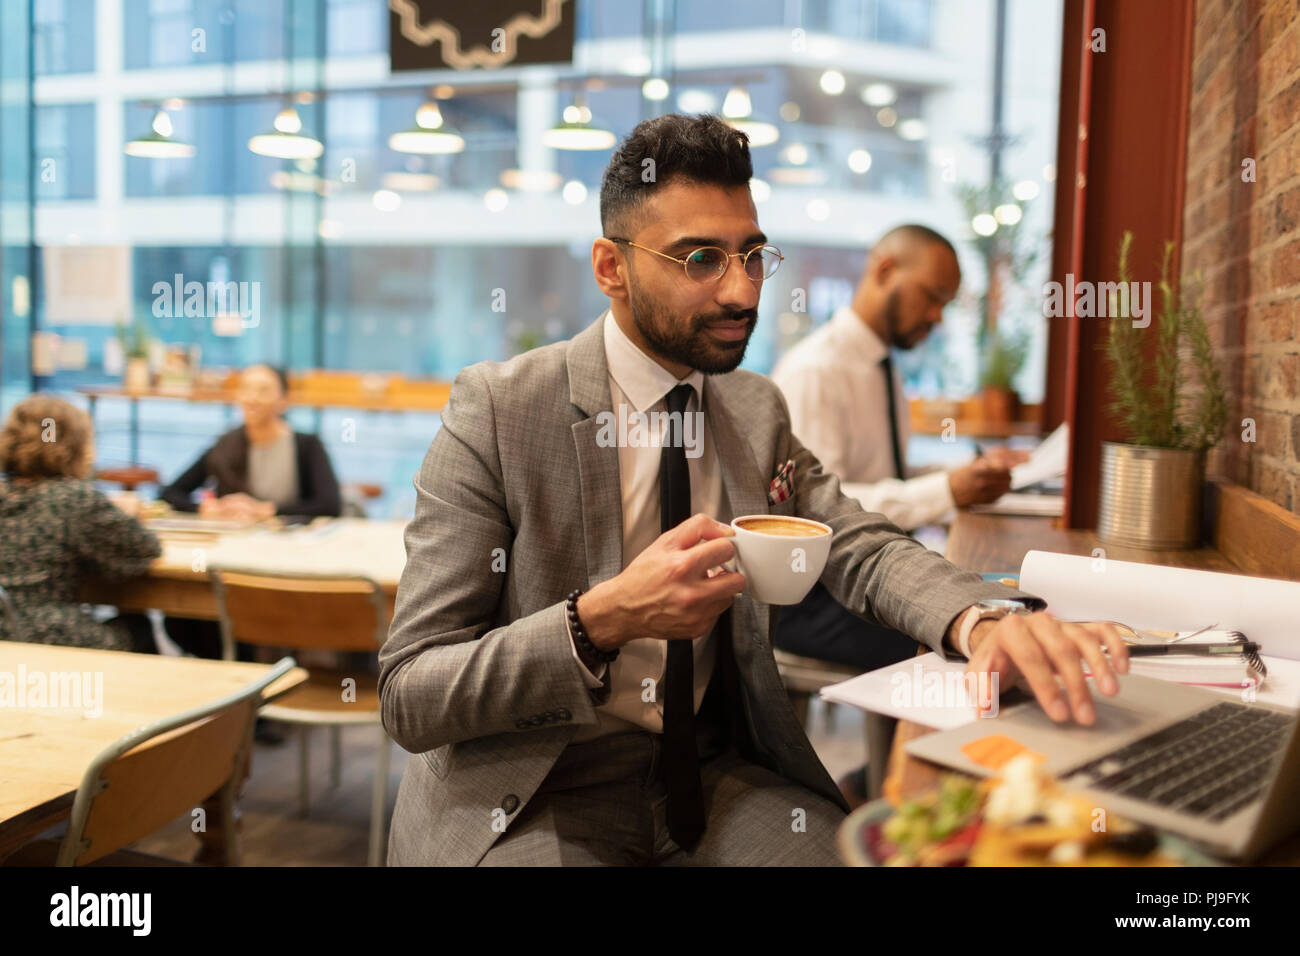 Focused businessman drinking coffee and working at laptop in cafe Stock Photo